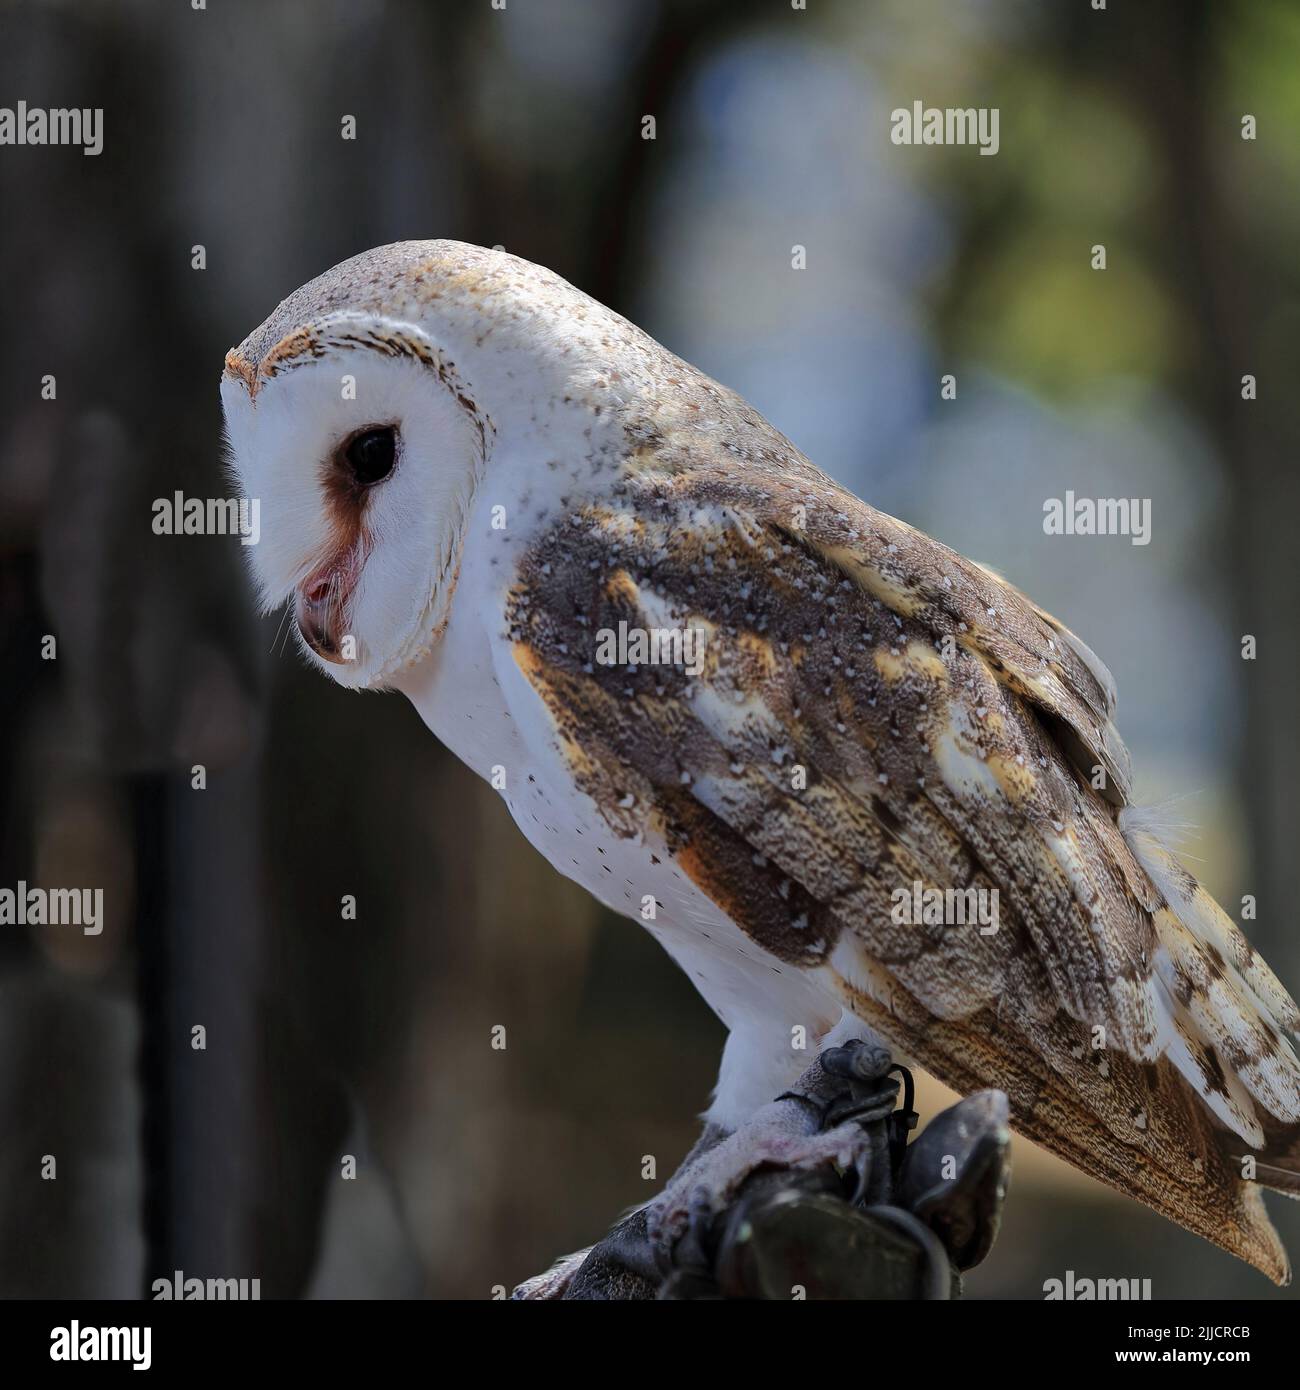 084 Barn owl, the most widespread species of owl in the world. Brisbane-Australia. Stock Photo